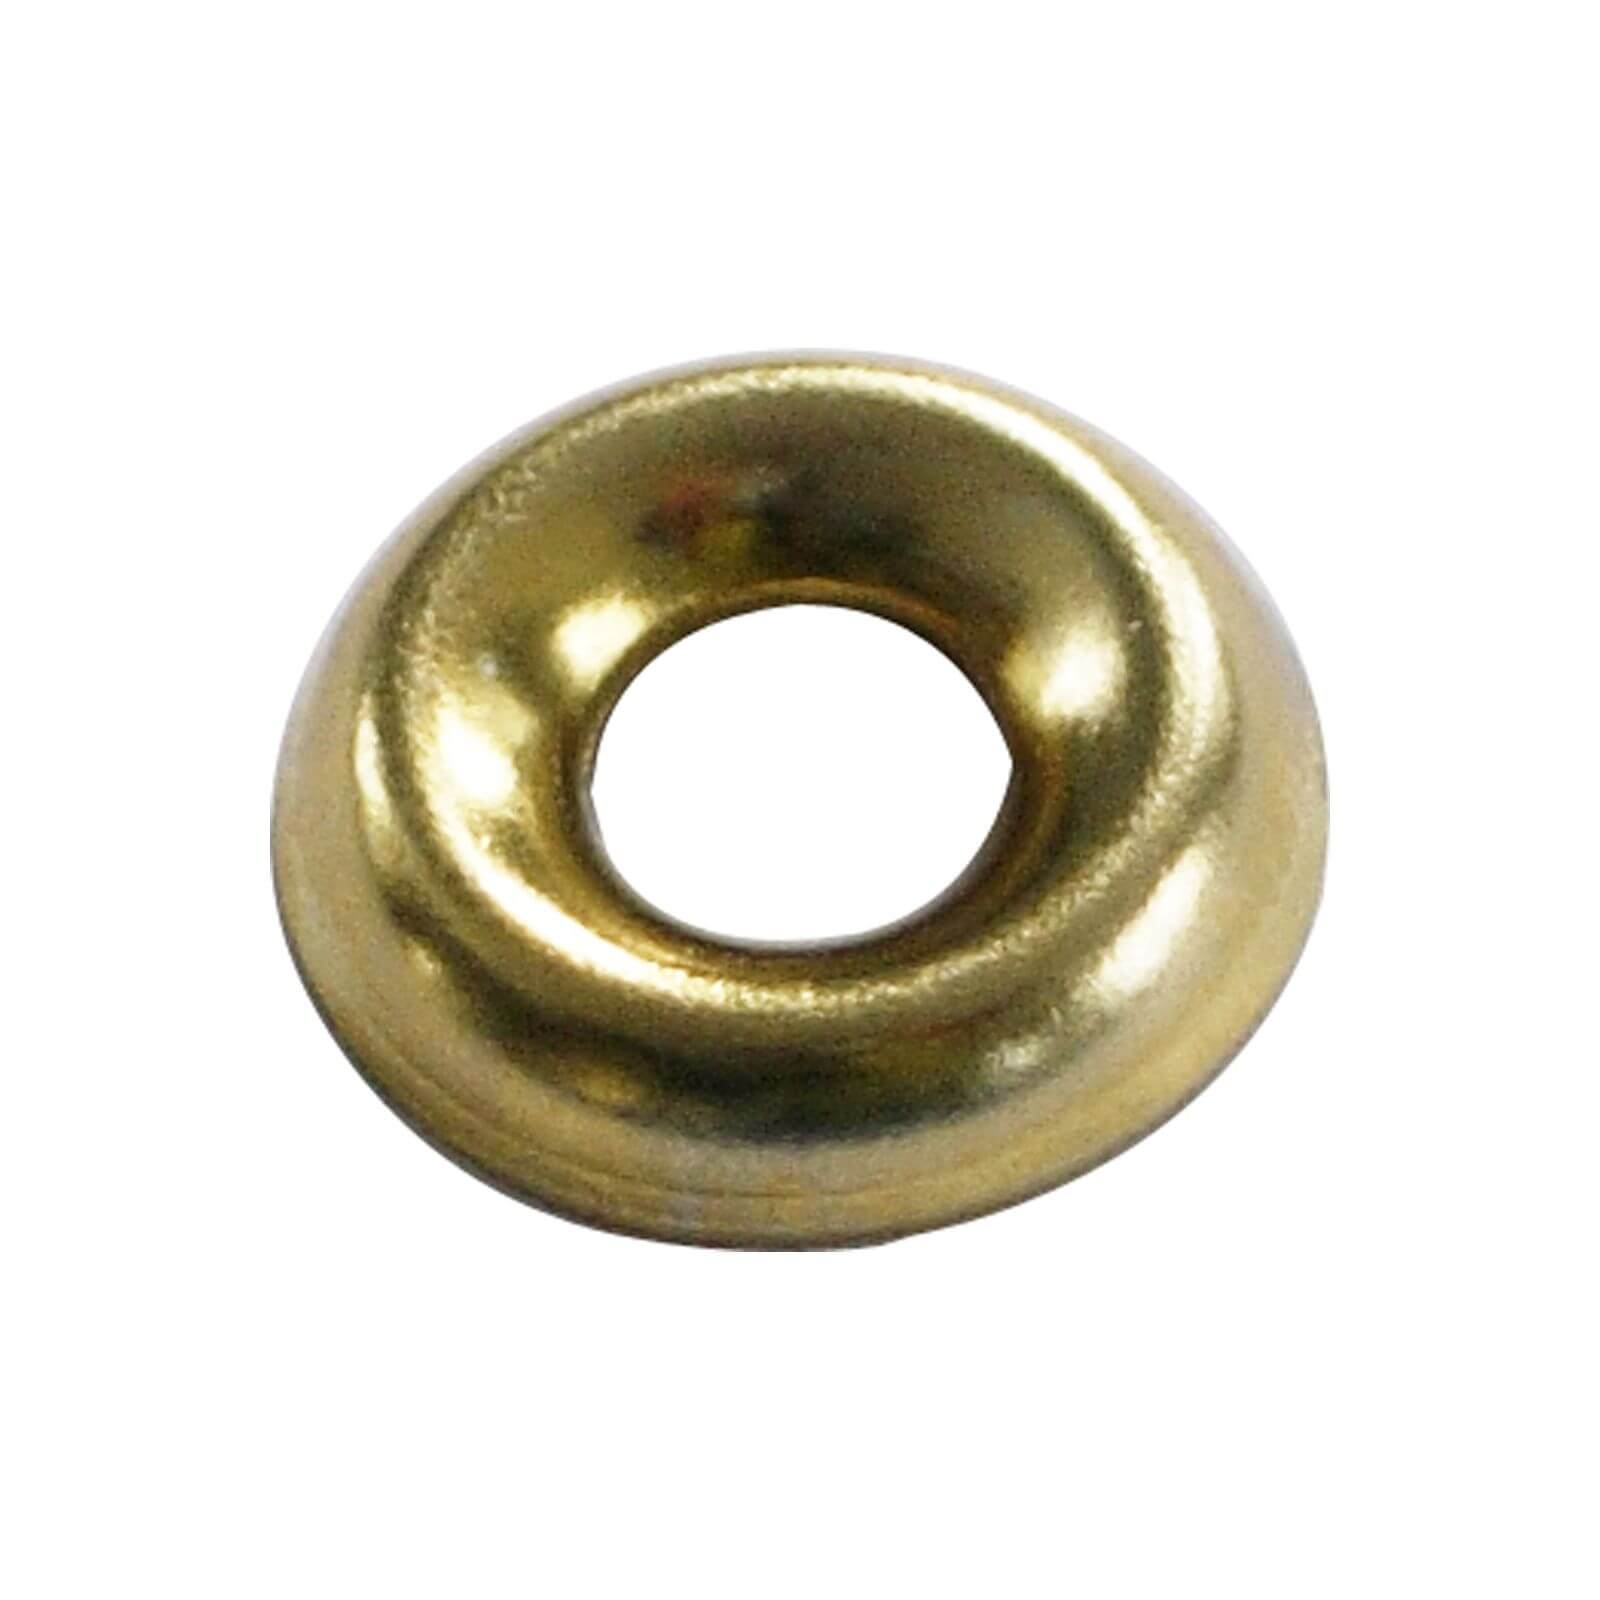 Screw Cup Washer - Brass Plated - 6mm - 20 Pack